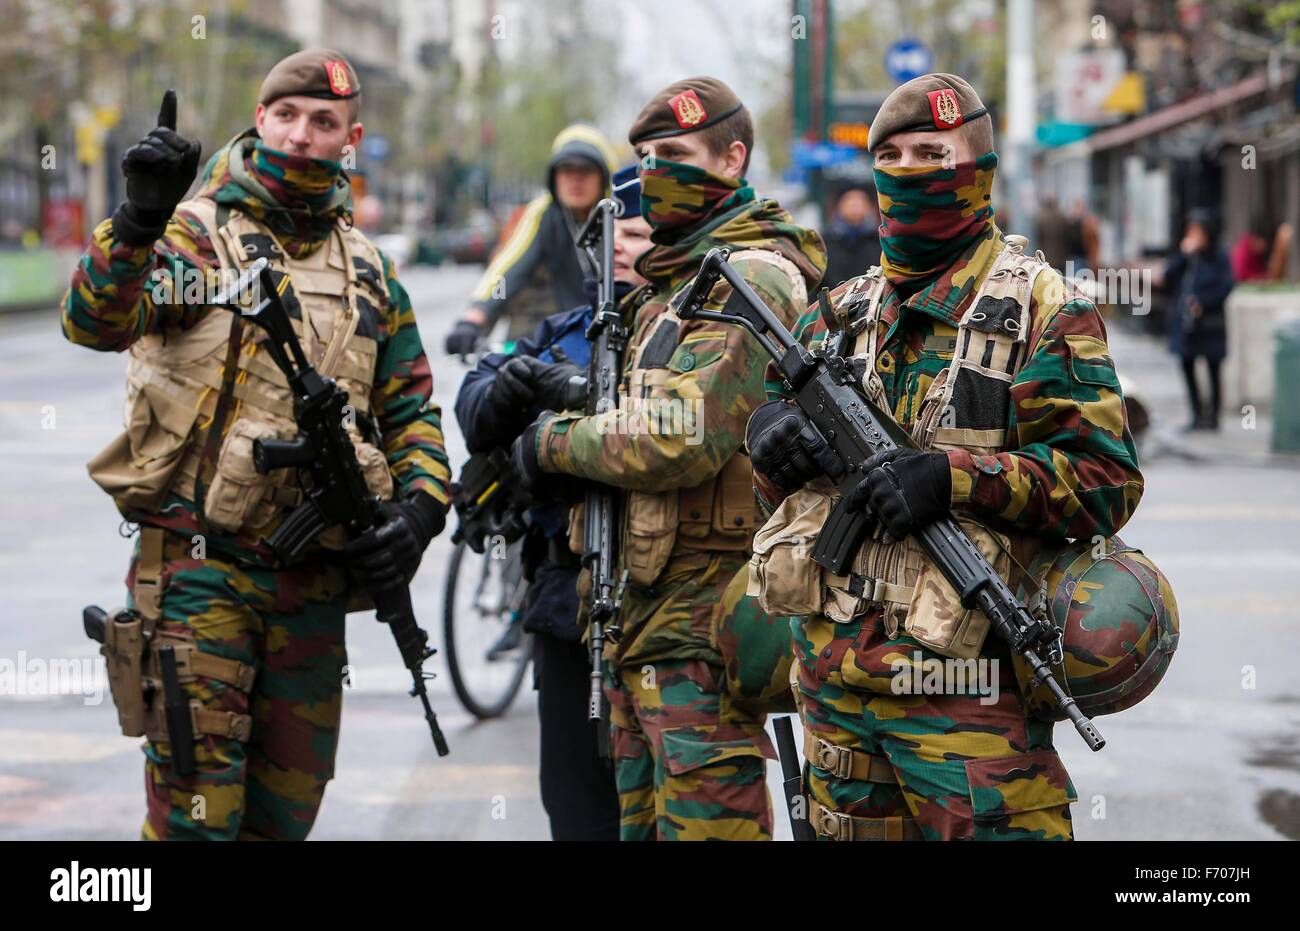 Brussels, Belgium. 22nd November, 2015. Belgian soldiers patrol in central Brussels, capital of Belgium, on Nov. 22, 2015. Belgian Prime Minister Charles Michel confirmed on Sunday evening that the level 4 of terror alert, the highest possible, for the Brussels region remained in place. He said the rest of Belgium remains on level 3, following a new assessment by OCAM, the Belgian Coordinating Body for Threat Analysis. 'I confirm that we fear there might be a similar attack to Paris,' said Charles Michel. Credit:  Xinhua/Alamy Live News Stock Photo